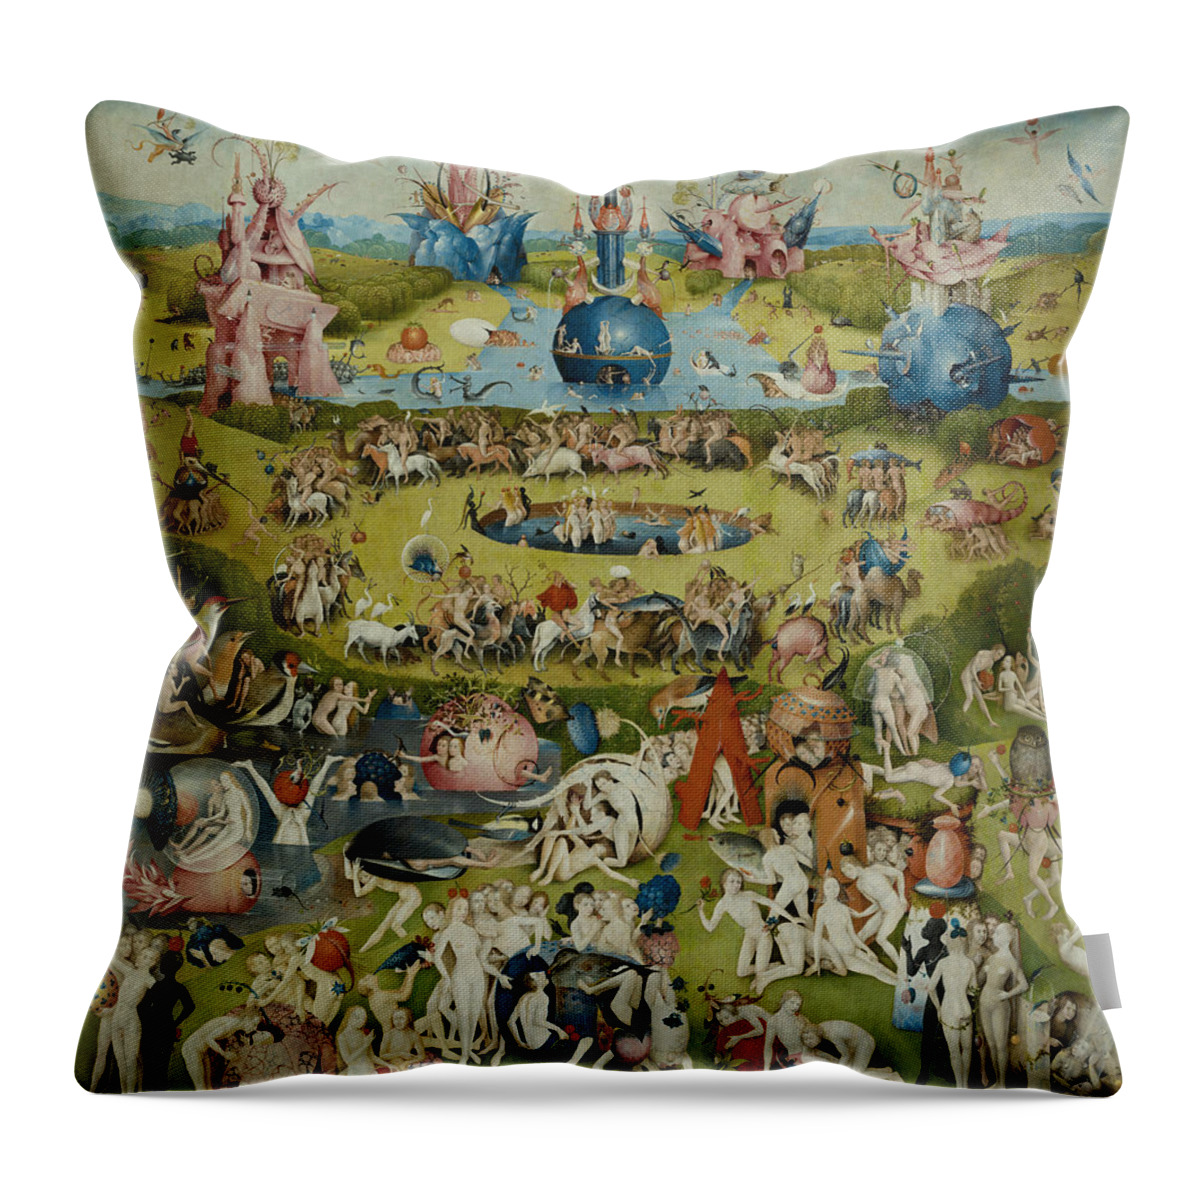 Fantasy Throw Pillow featuring the painting The Garden of Earthly Delights by Hieronymus Bosch